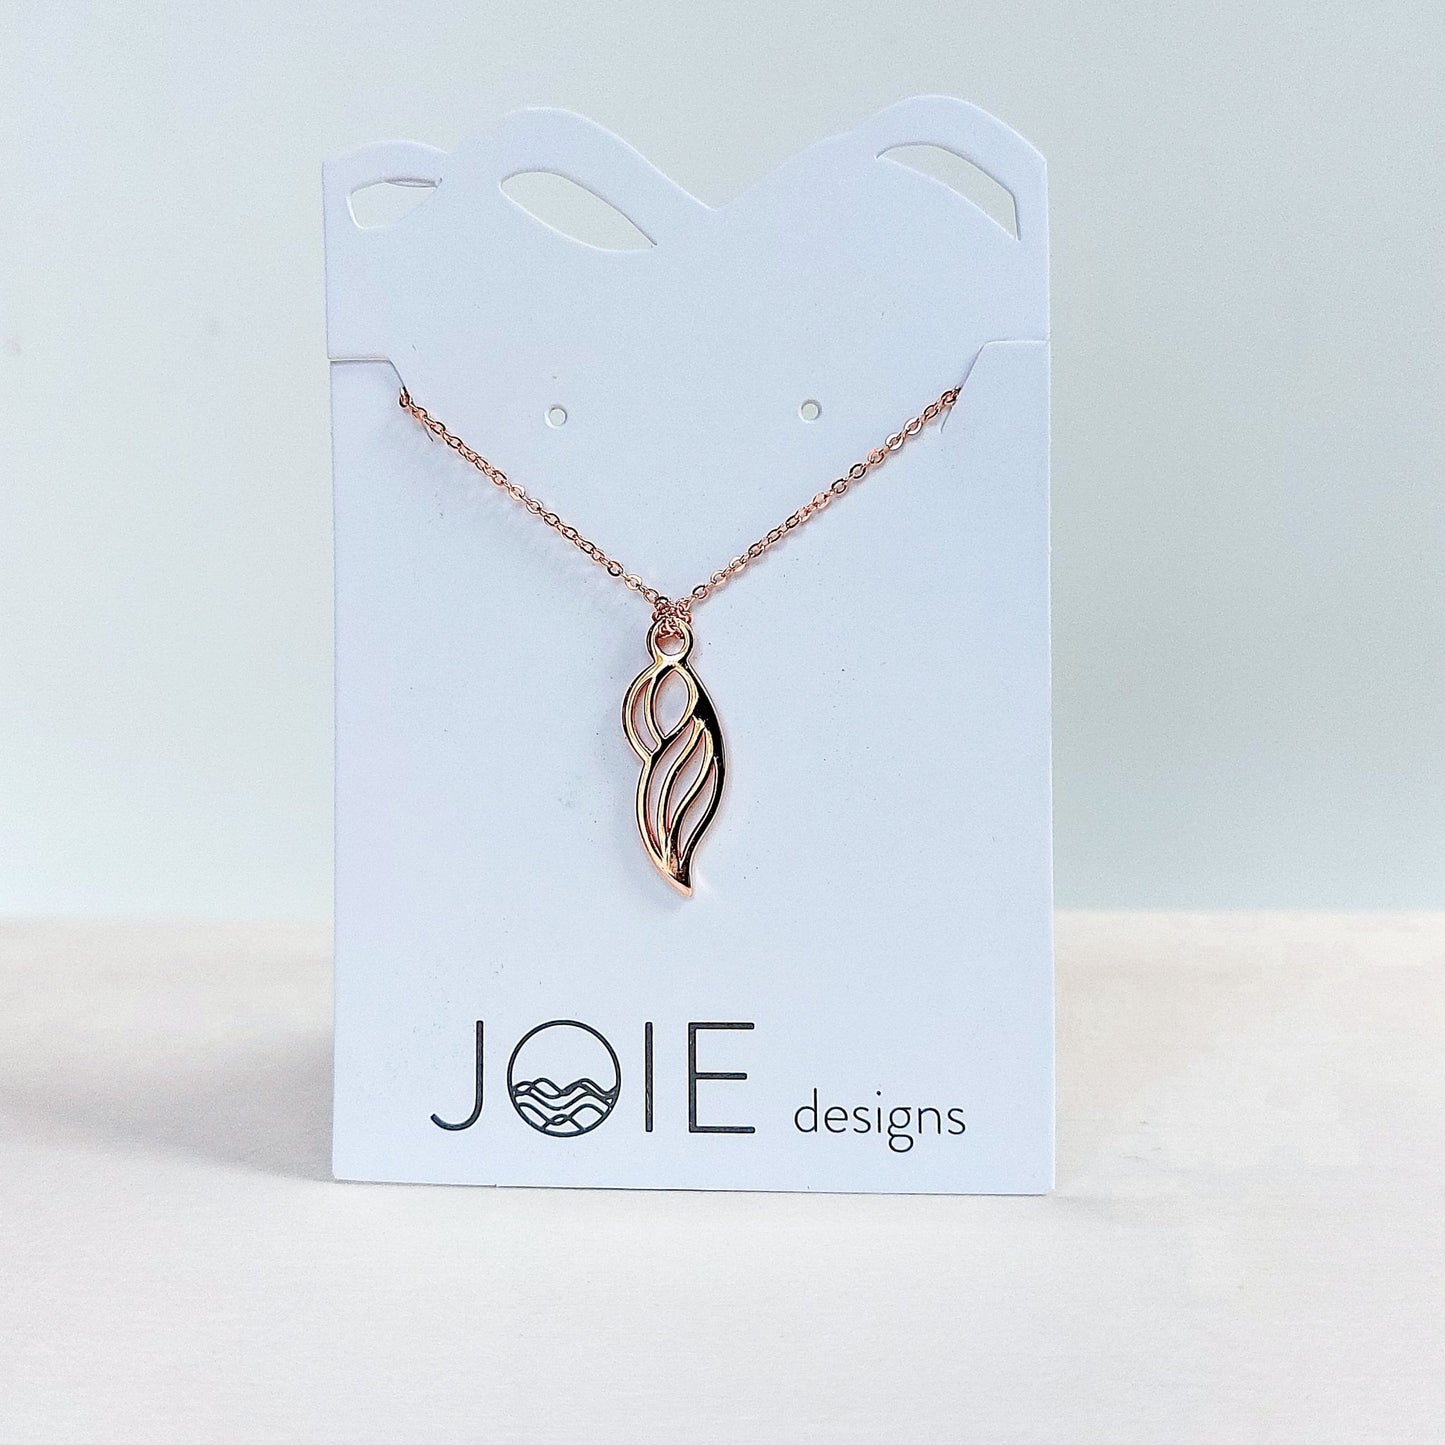 18k rose gold plated era pendant necklace that appears like a mother showcased on a jewellery card